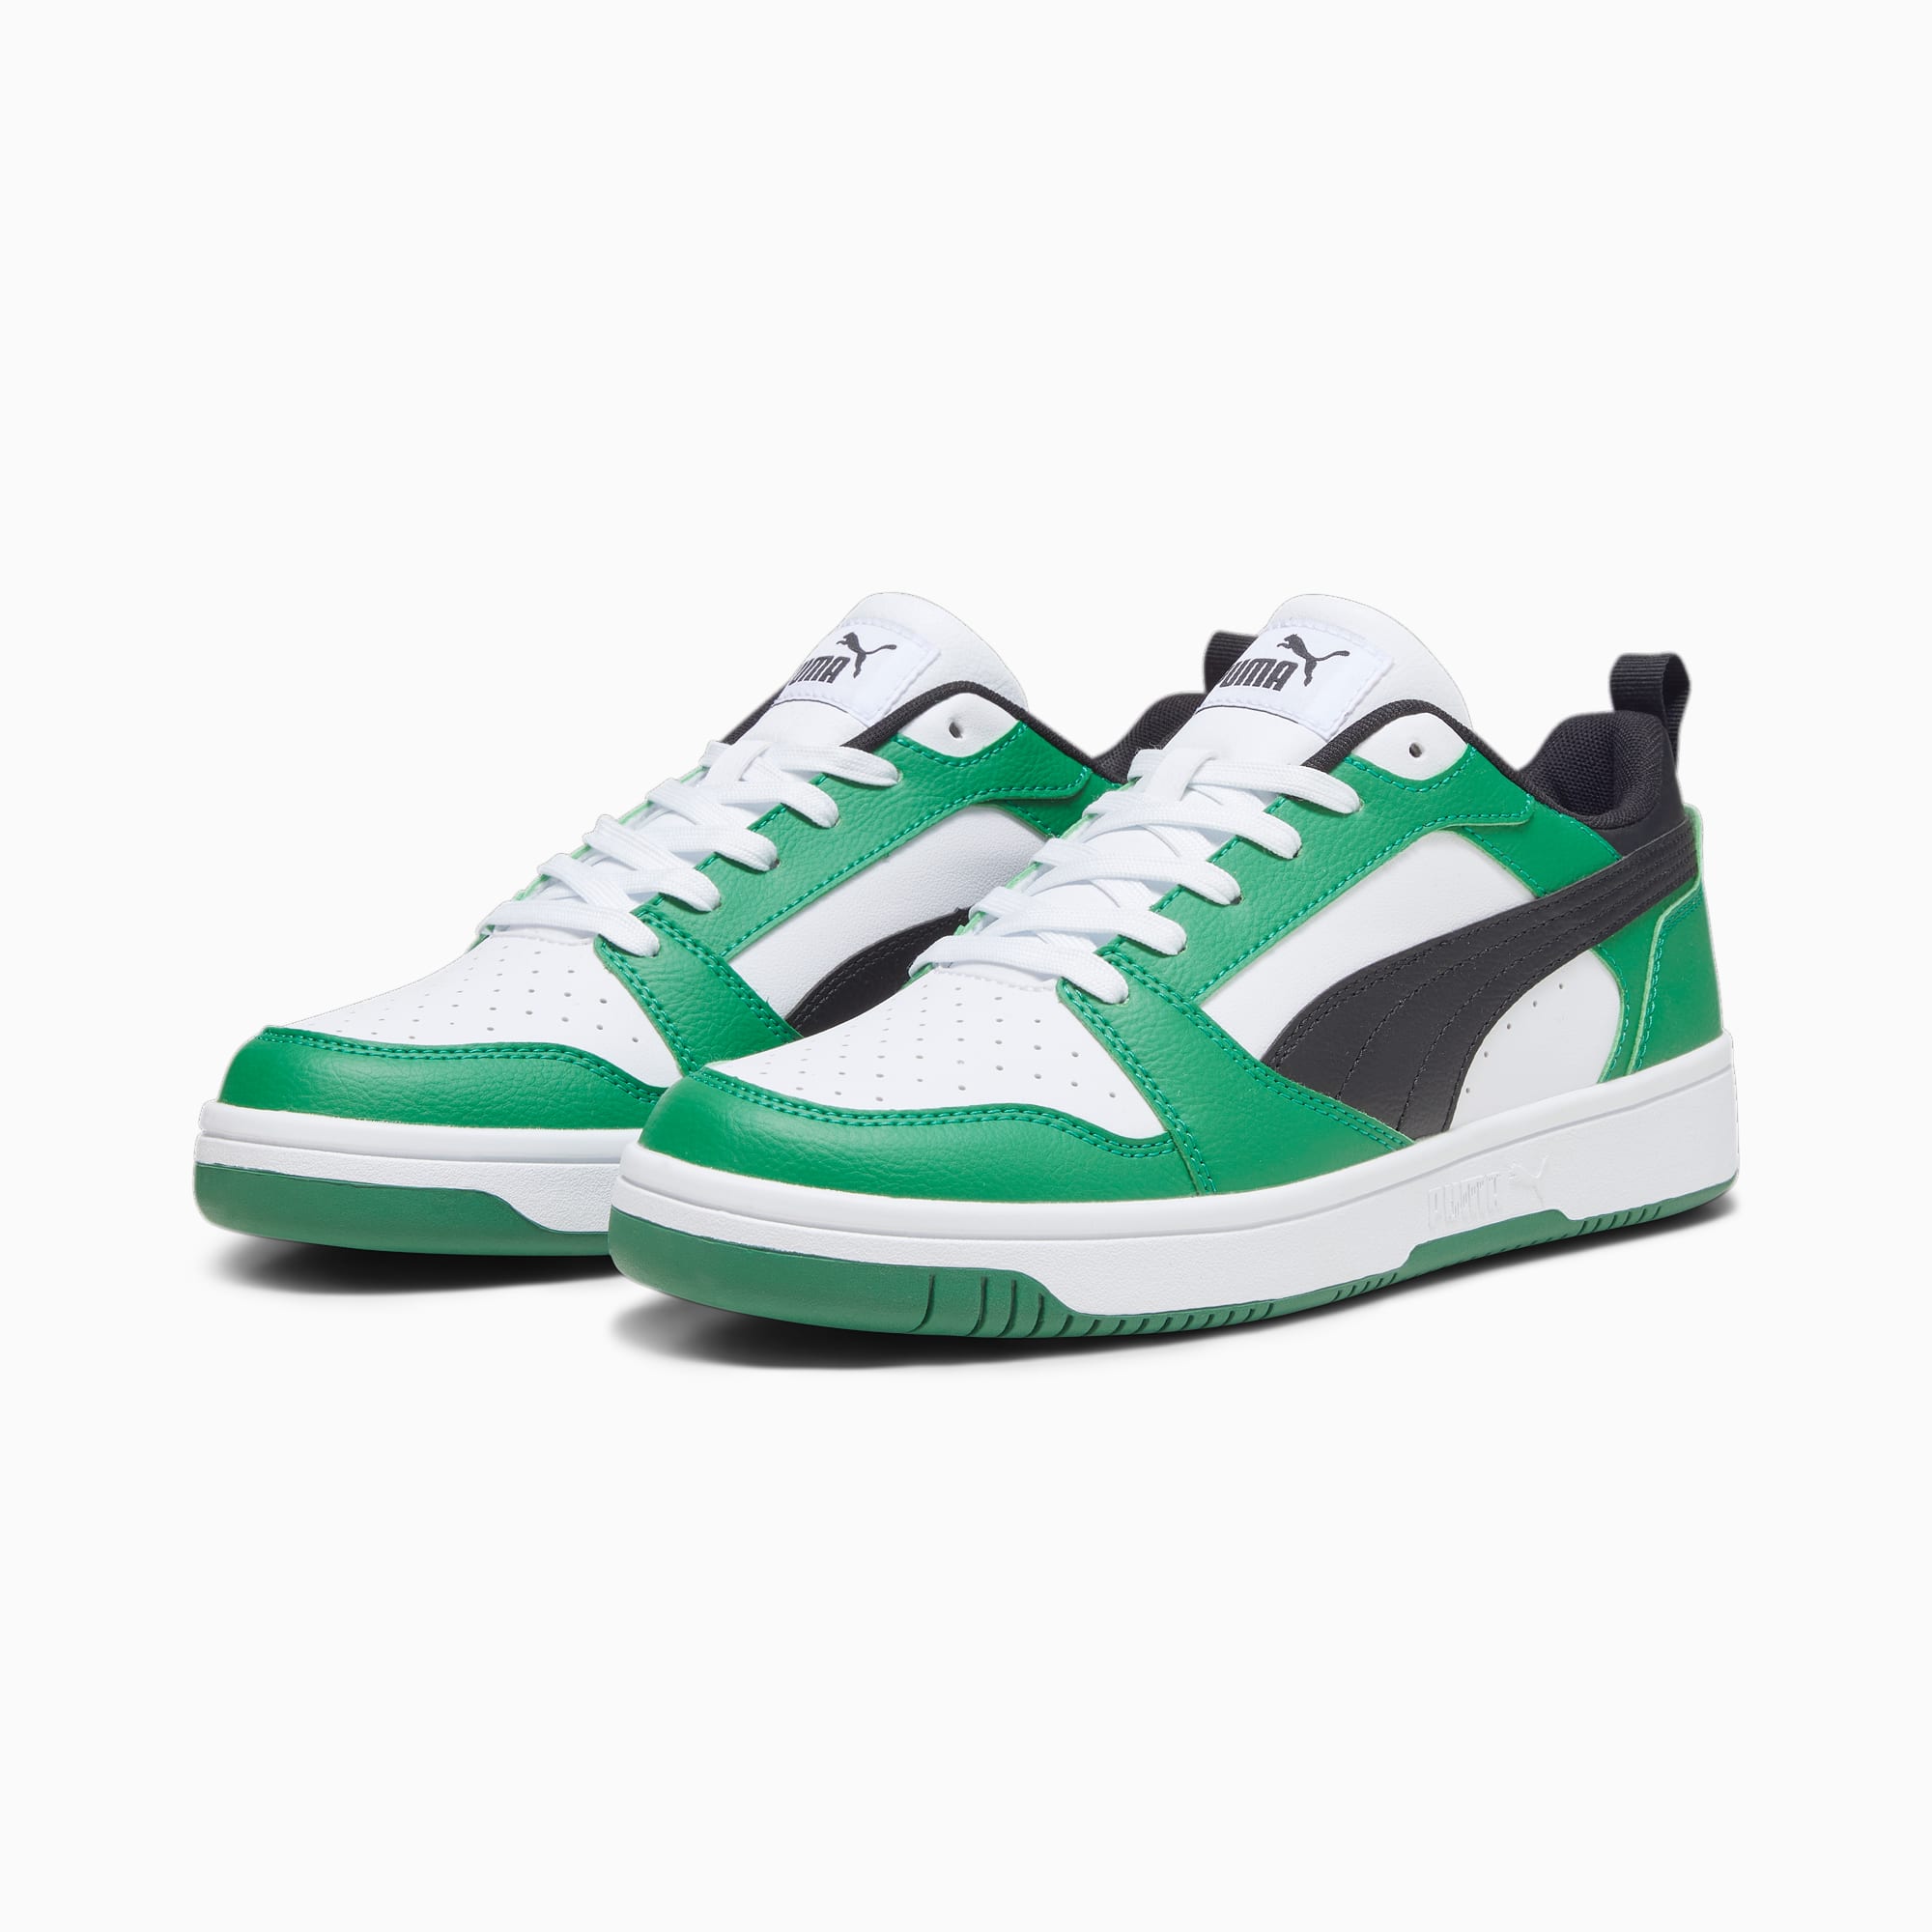 Women's PUMA Rebound V6 Low Sneakers, White/Black/Archive Green, Size 35,5, Shoes